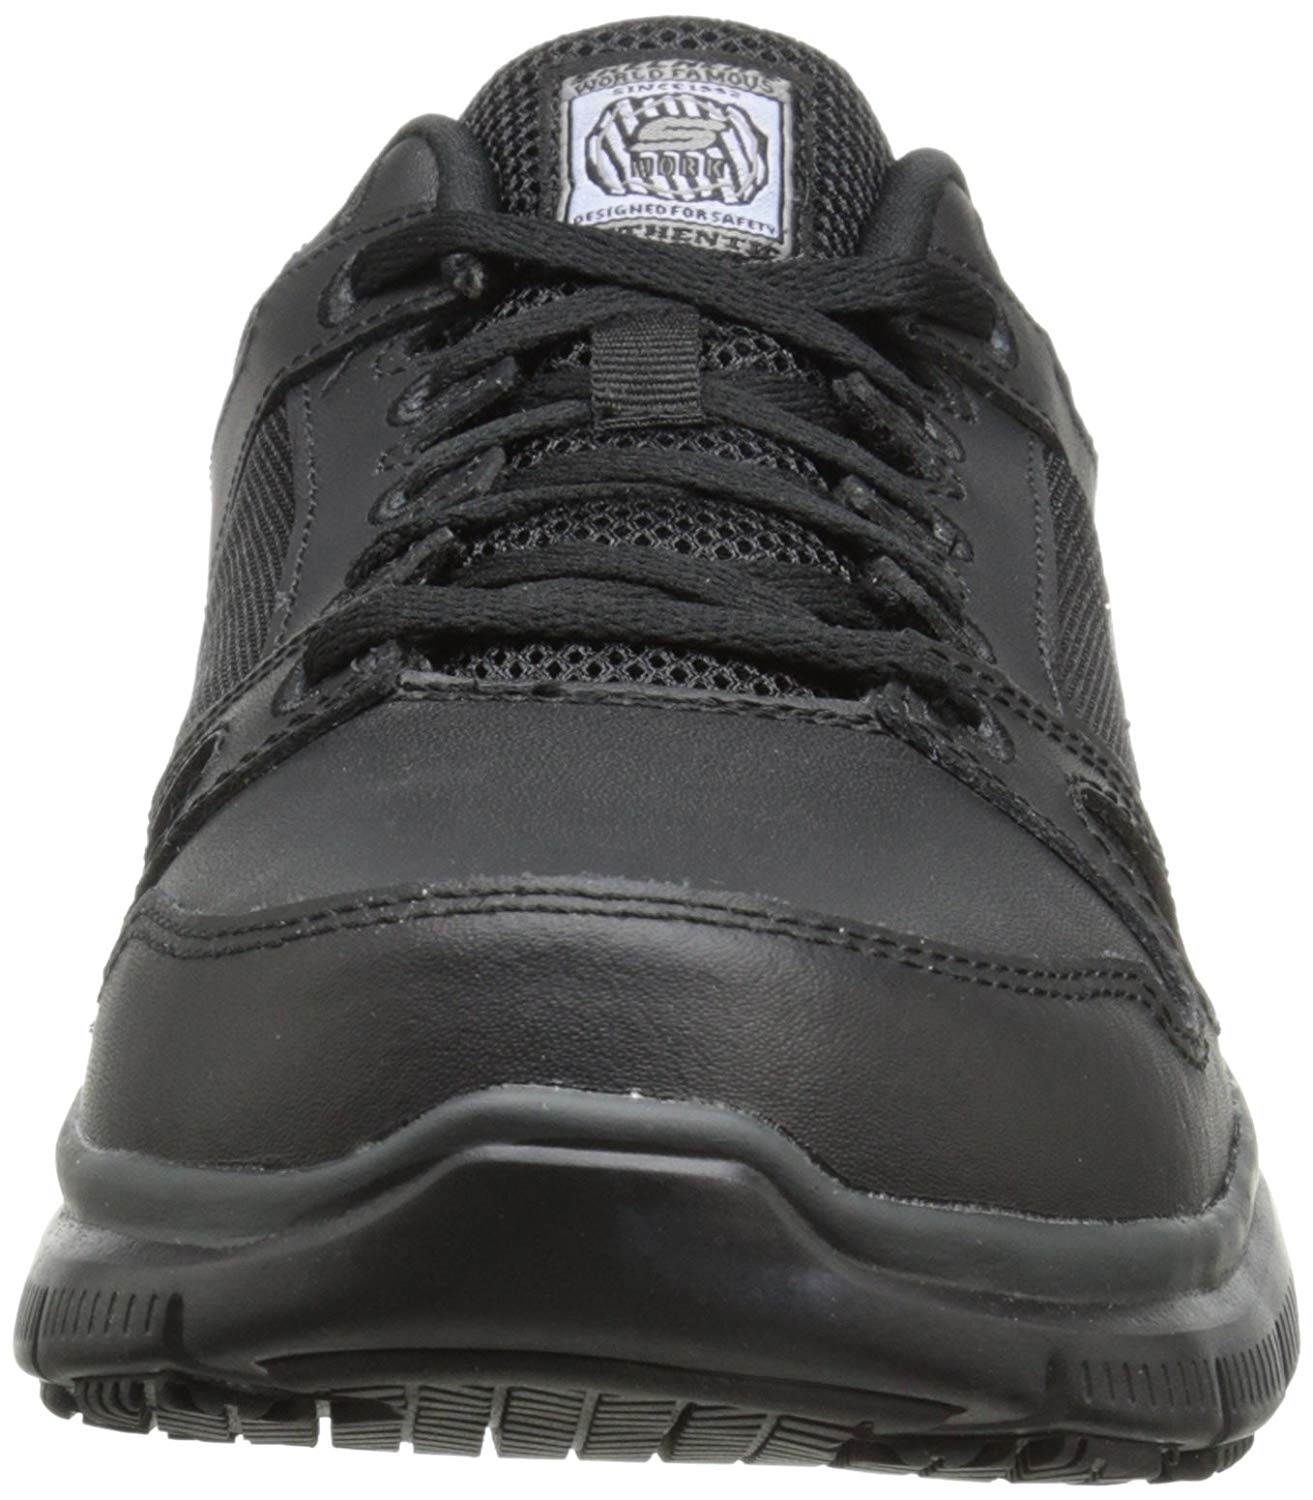 Skechers Mens 77040EW Soft toe Lace Up Safety Shoes, Black, Size 8.0 ...